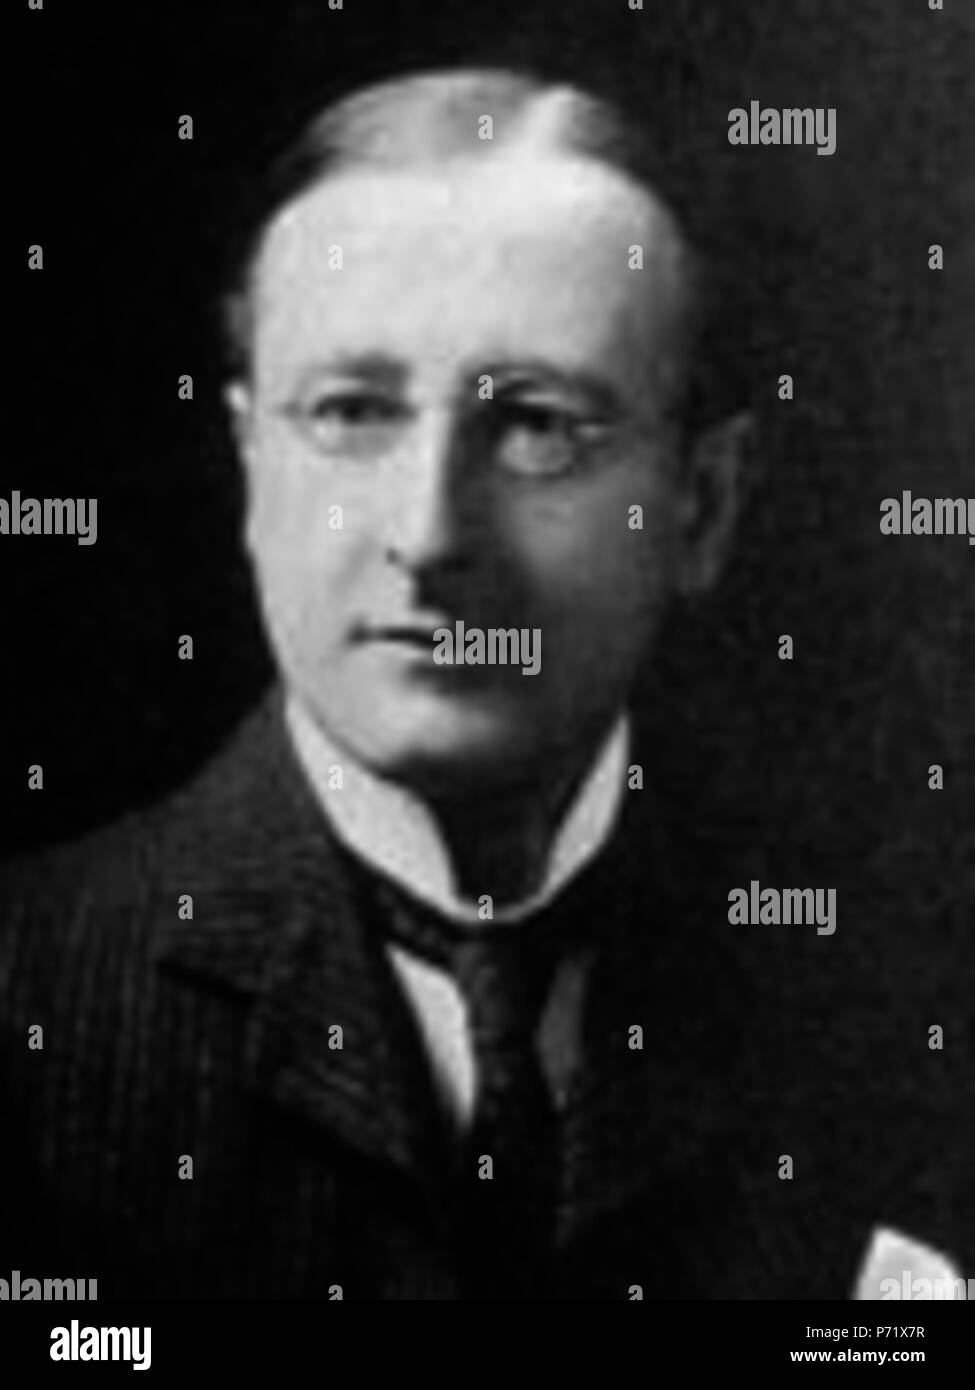 English: John Alexander Strachey Bucknill (14 September 1873 – 6 October 1926), a British lawyer and judge who served as Chief Justice of the Straits Settlements. 30 July 2014, 23:18:32 (original upload date). 39 John Bucknill, lawyer and judge Stock Photo